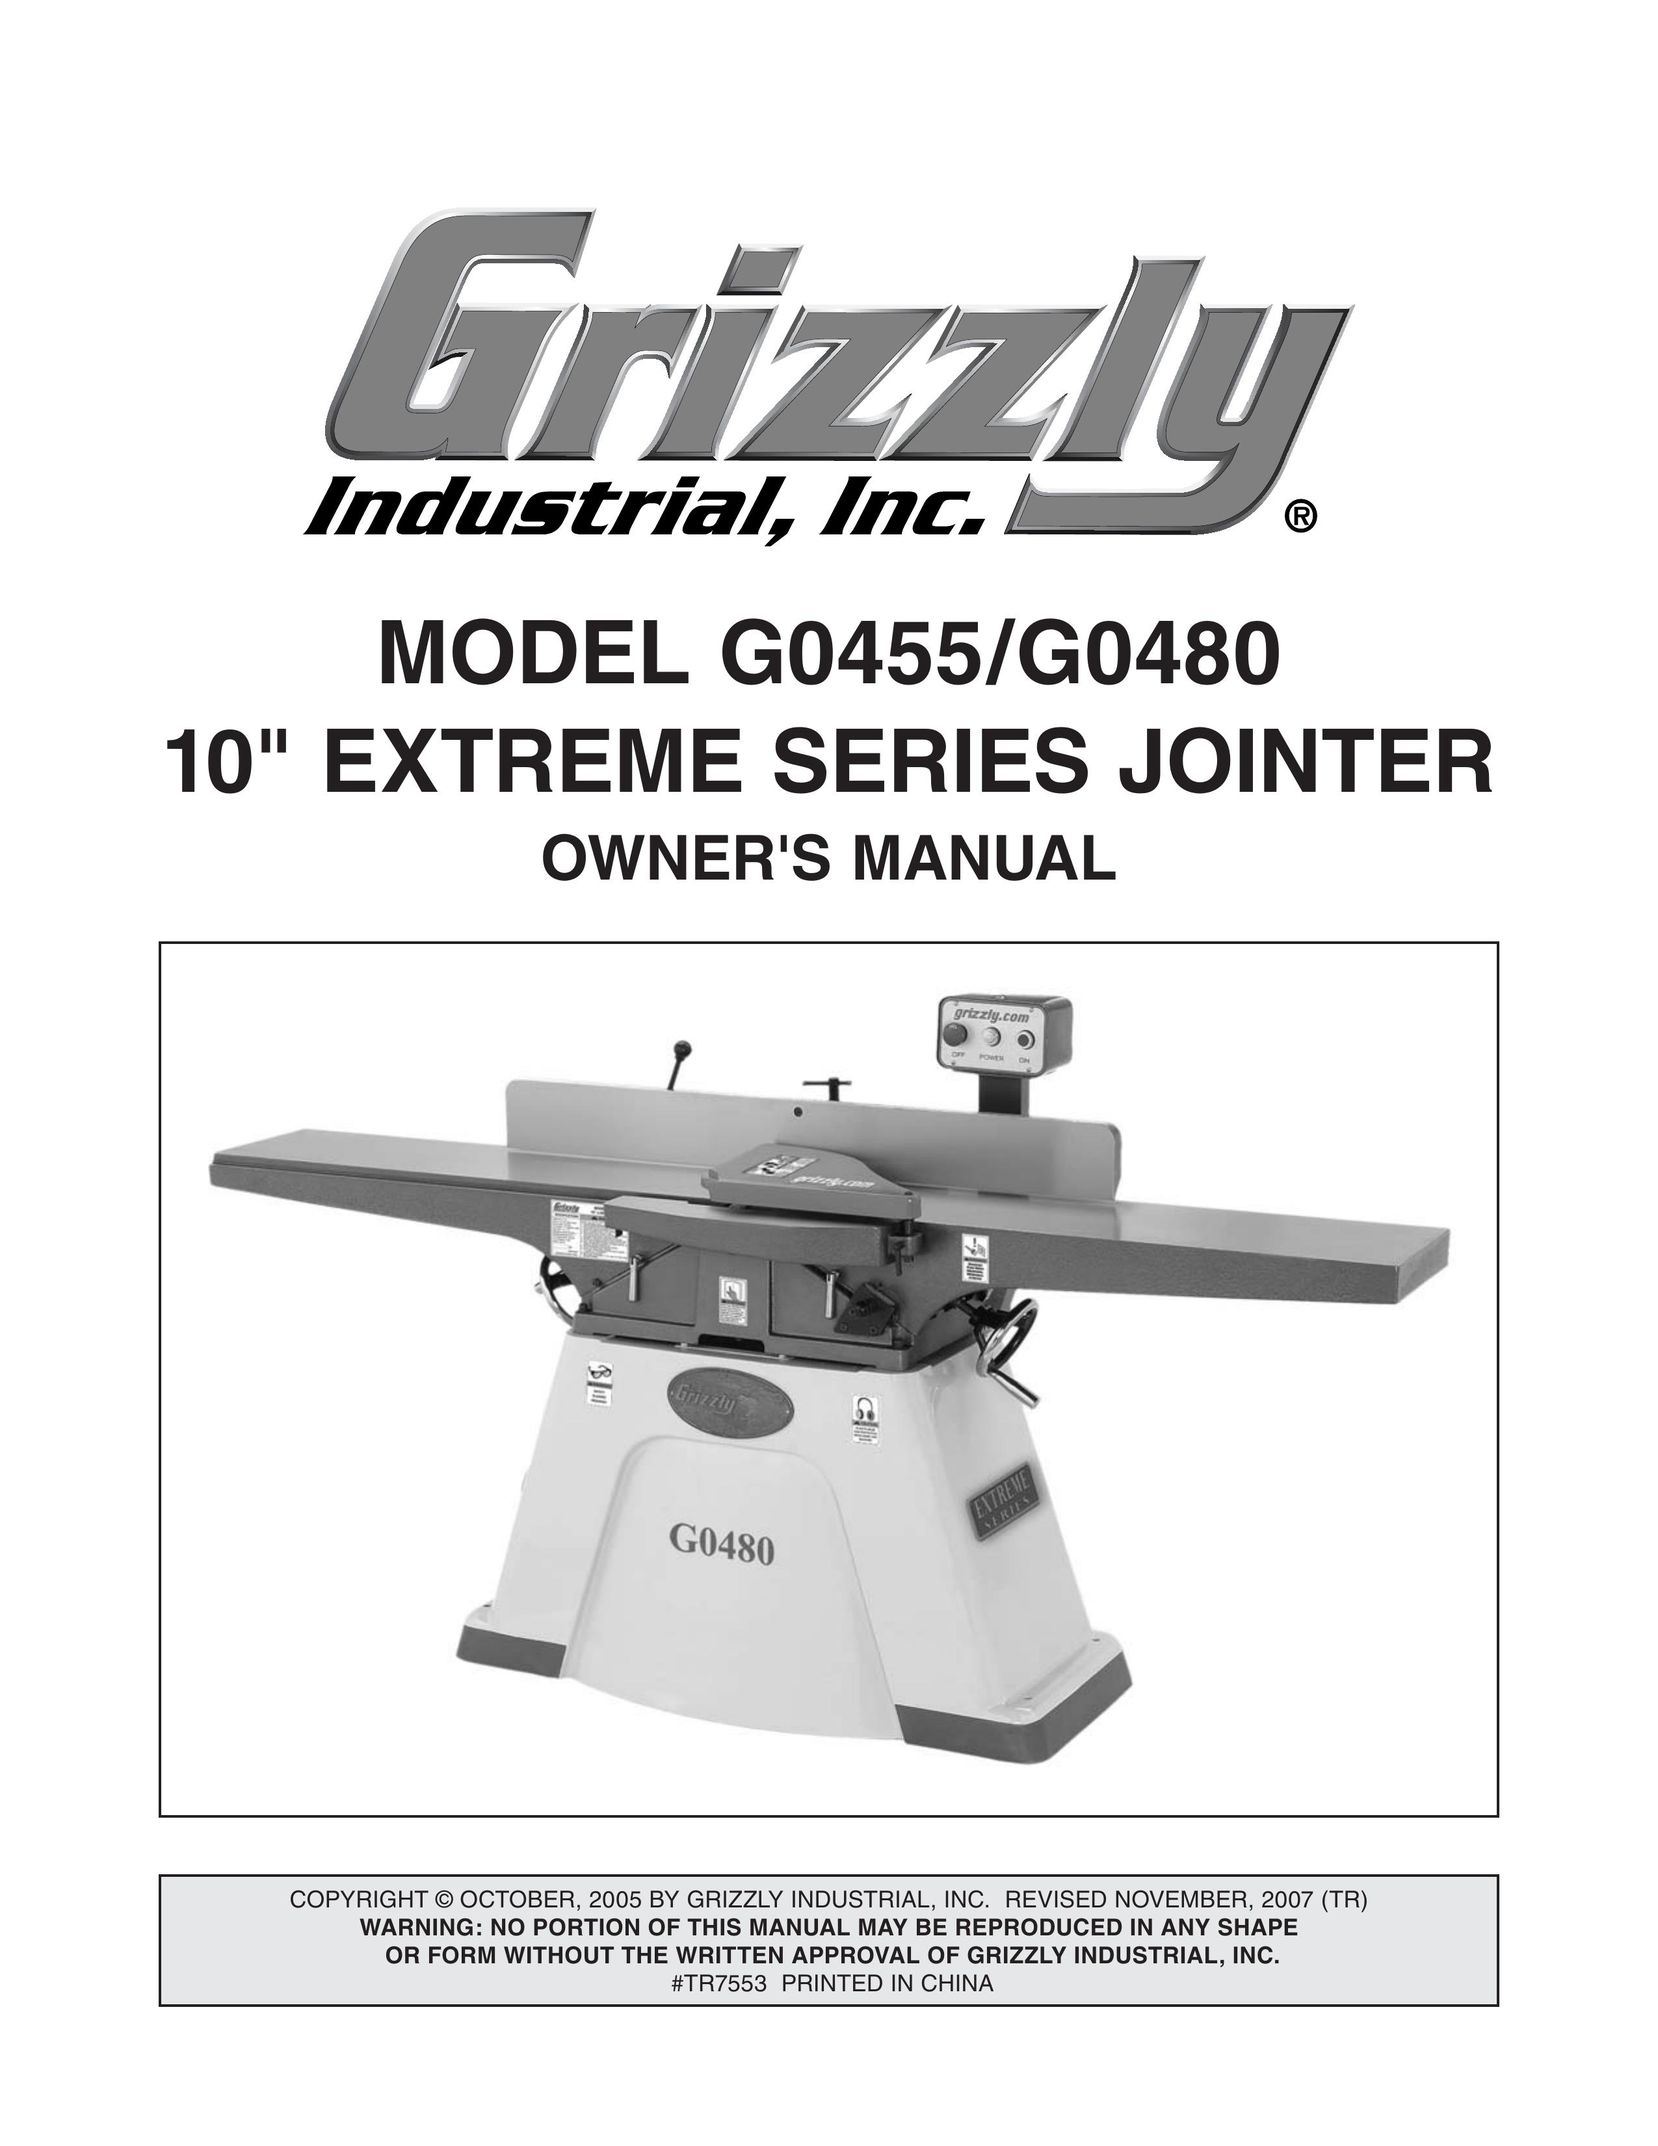 Grizzly G0455 Planer User Manual